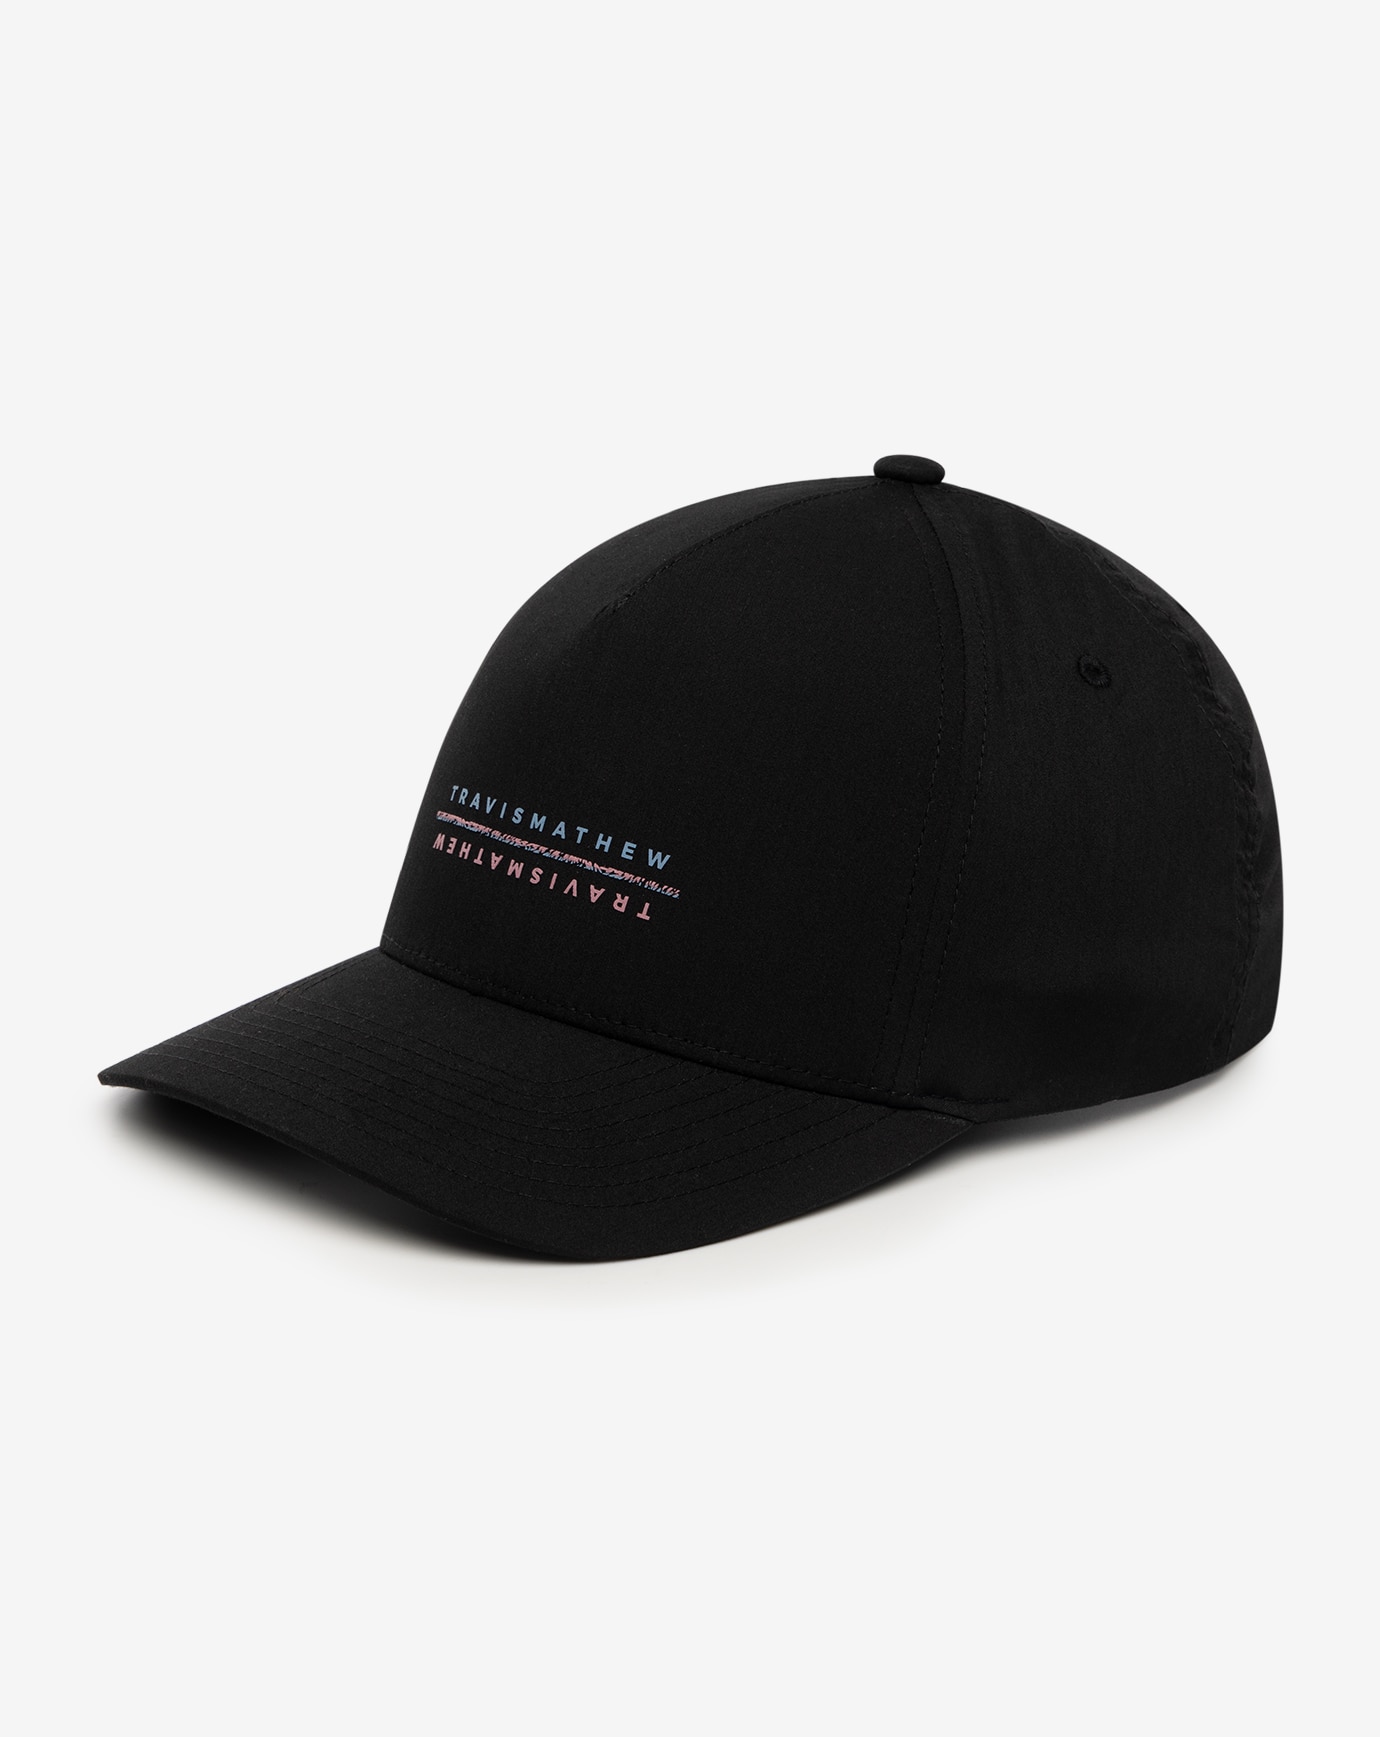 NIGHT ON THE TOWN SNAPBACK HAT Image Thumbnail 3